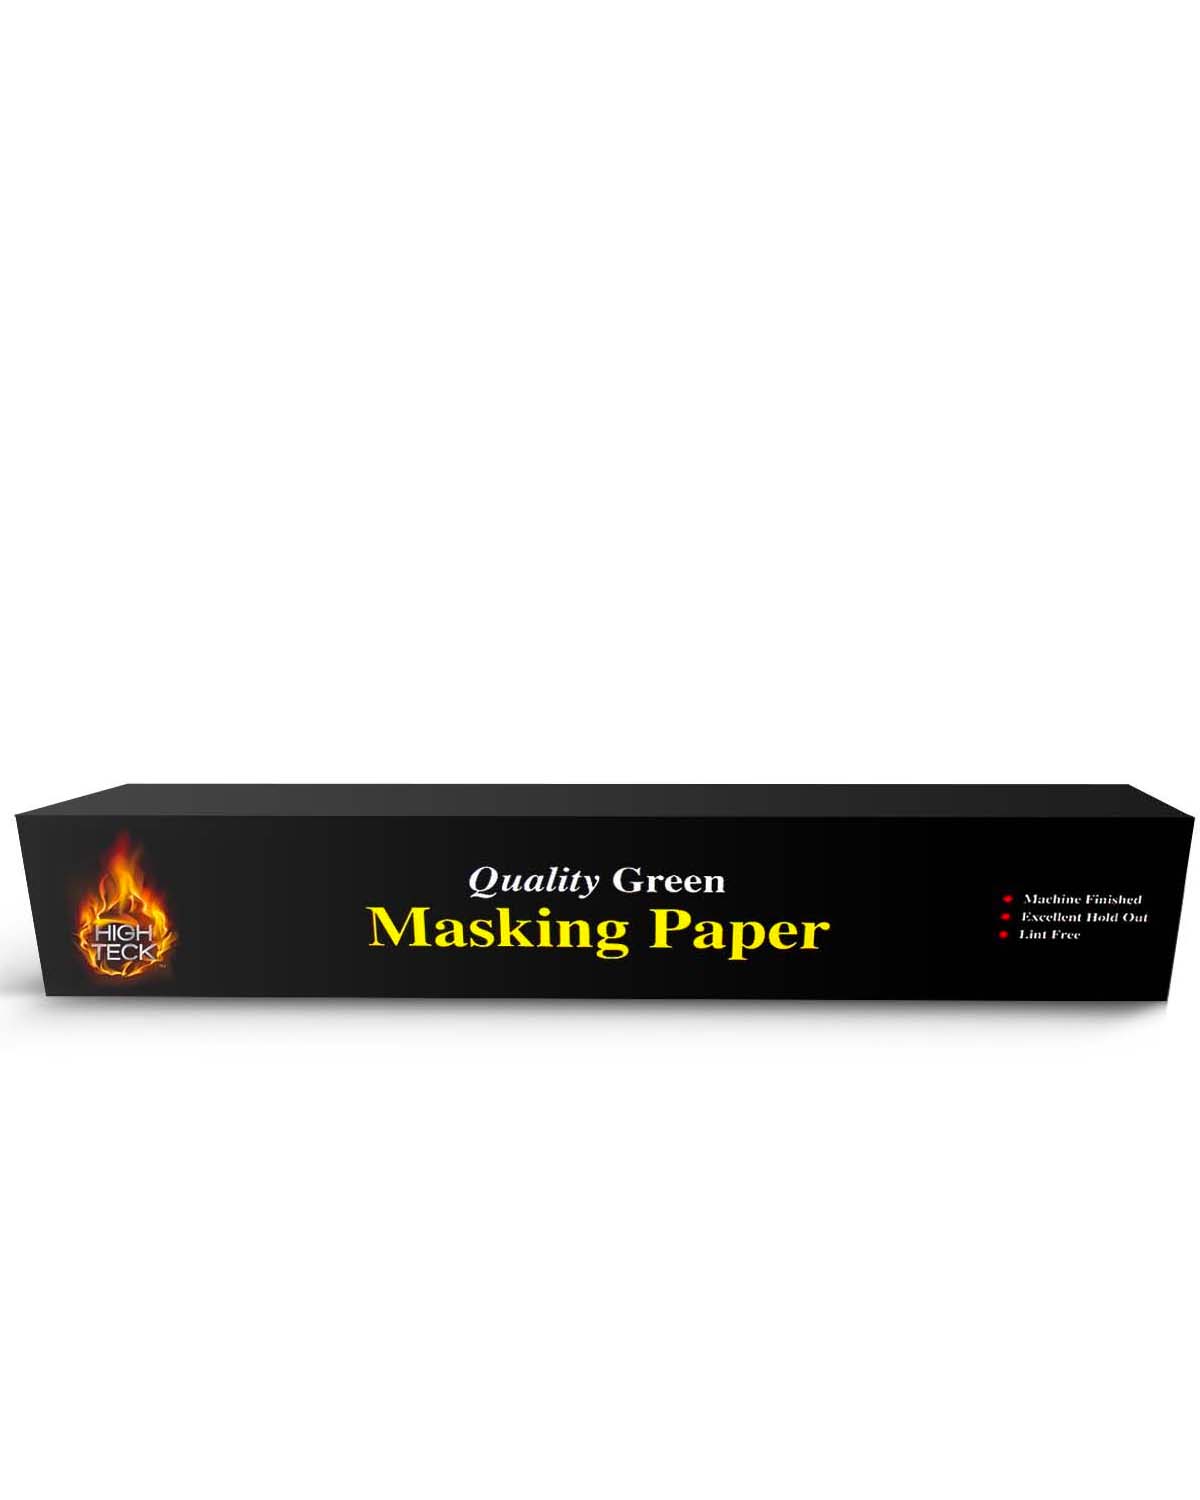  Quality Green Masking Paper 750' 